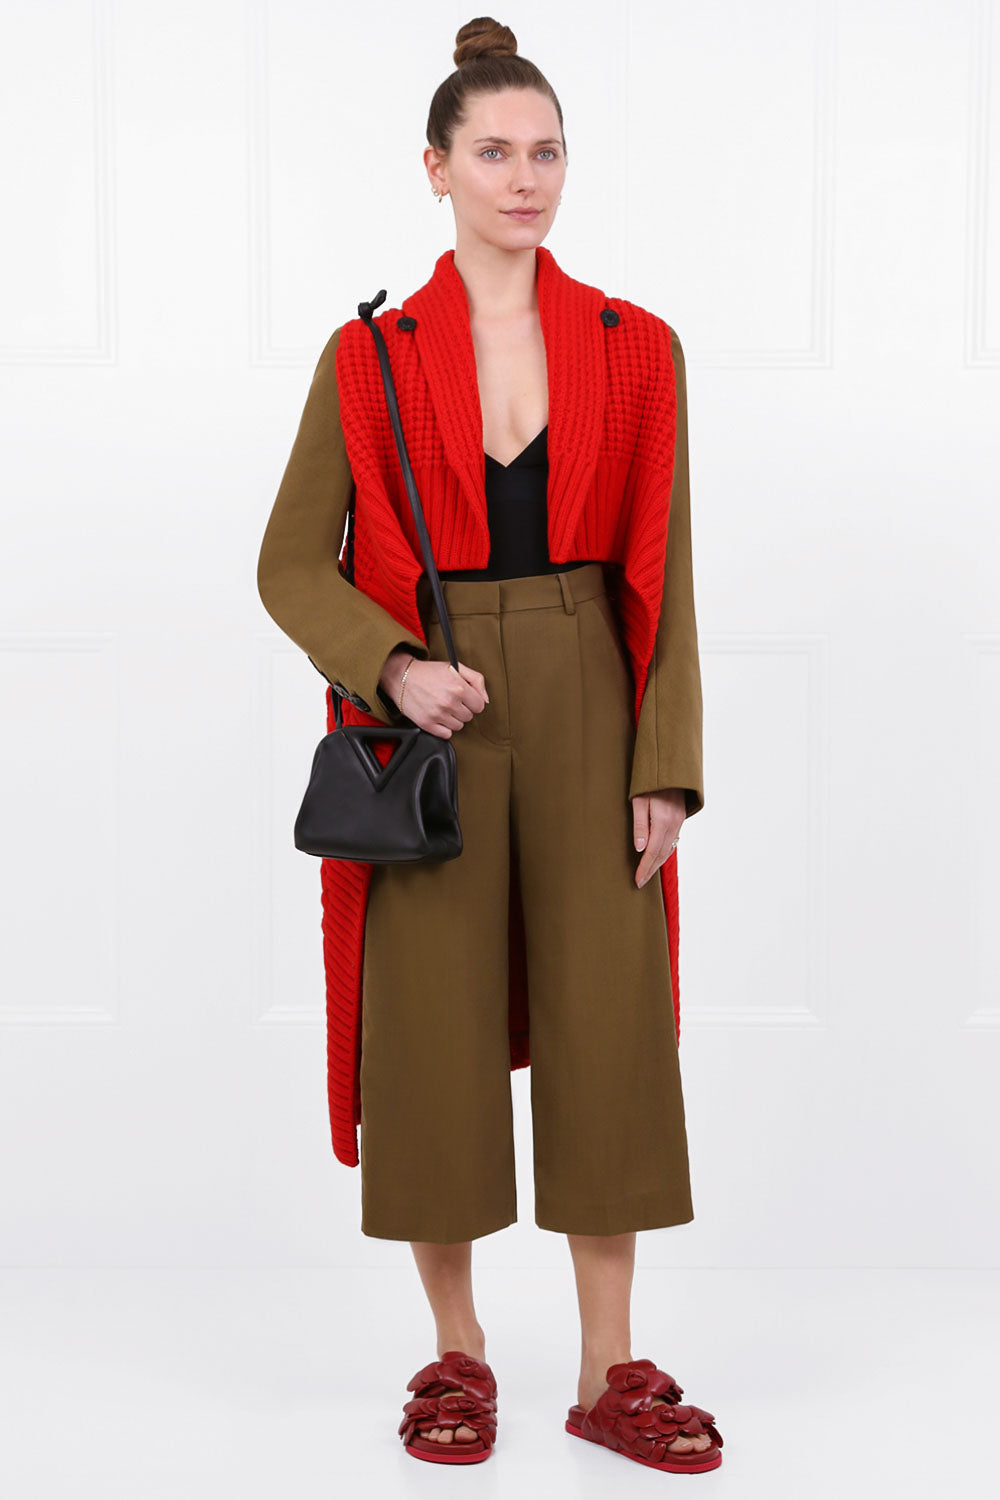 SACAI RTW CONTRAST KNIT COAT RED/CAMEL